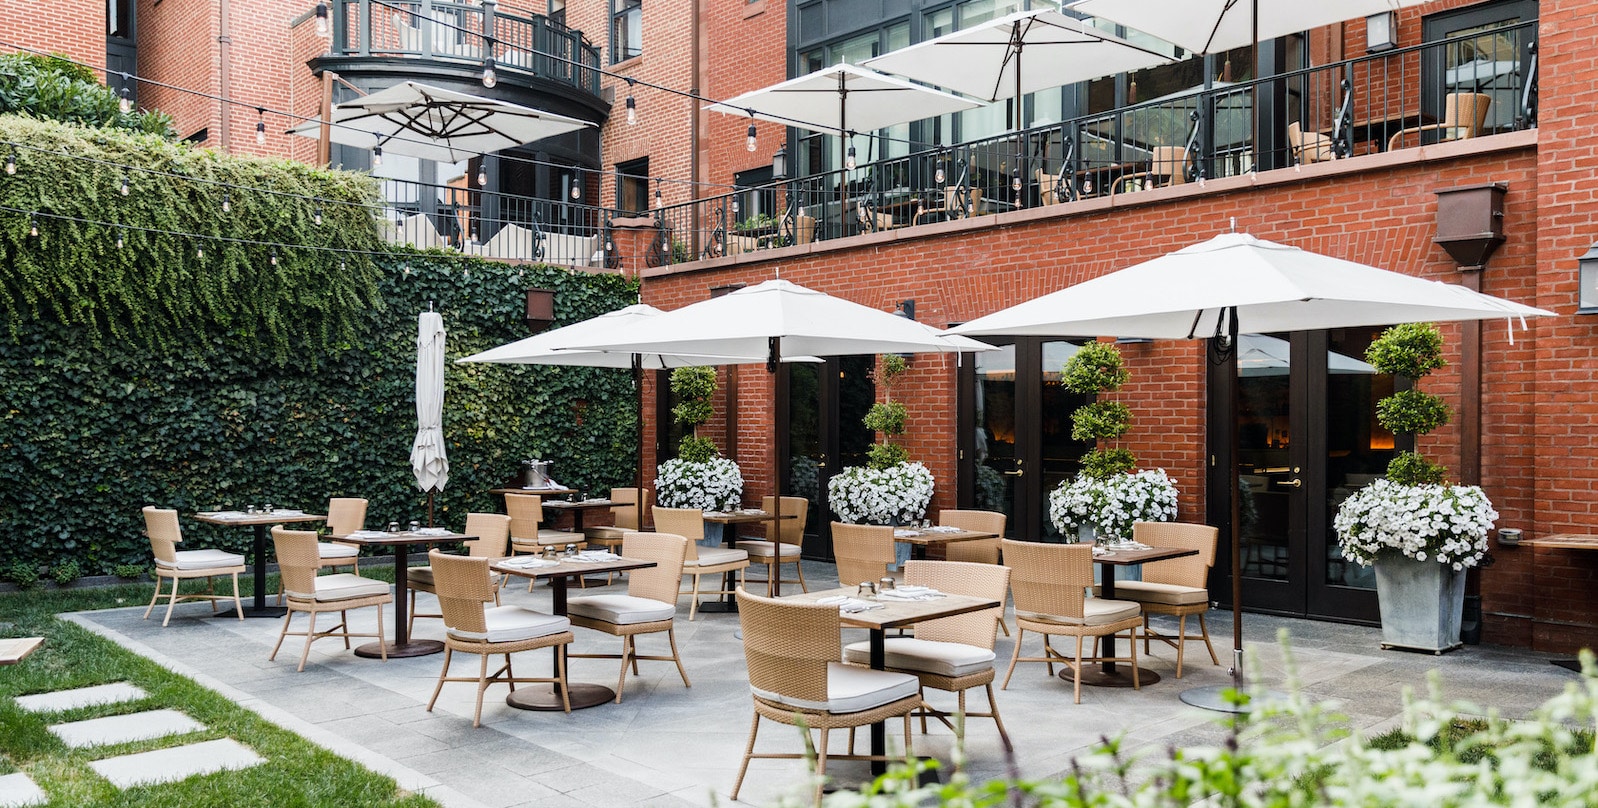 Tables, chairs and umbrellas set up in courtyard against lush ivy and brick face of the hotel.